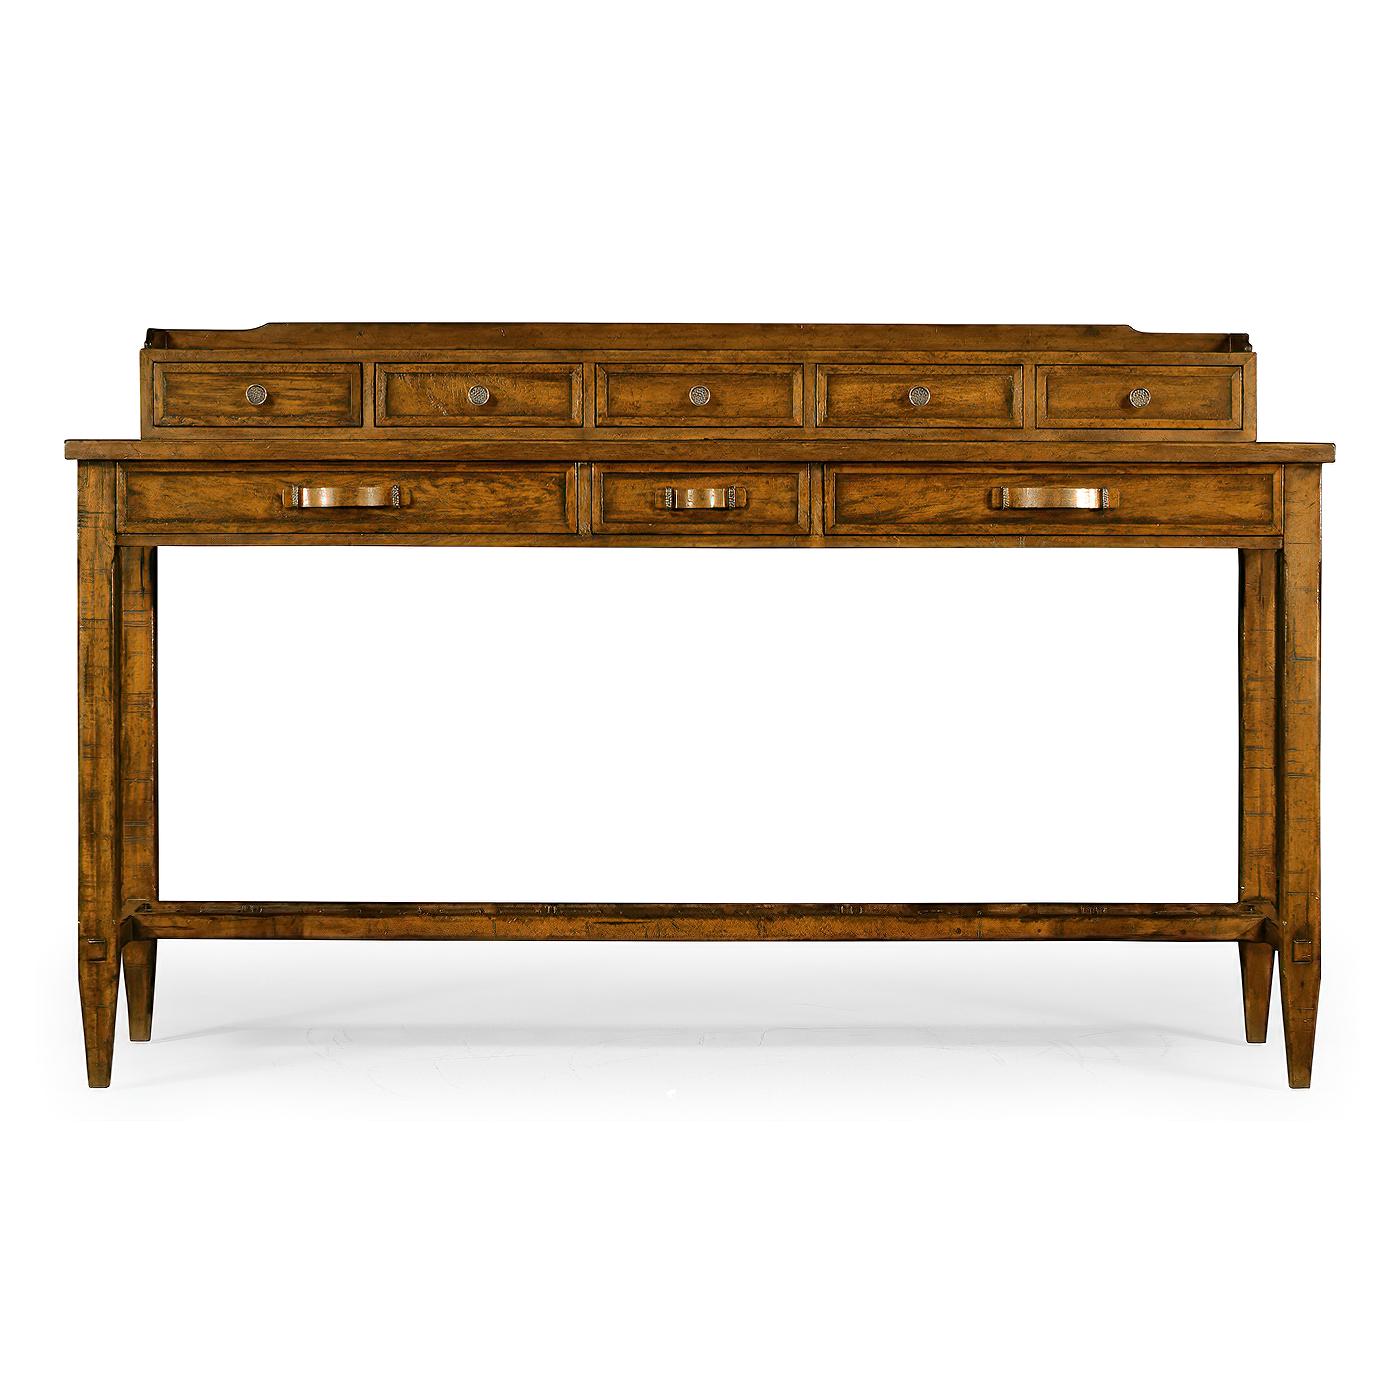 Country style planked walnut sideboard with a register of drawers set to the rear. Three strap handled drawers to the front set with oak dividers. Storage rack beneath. 

Dimensions: 72